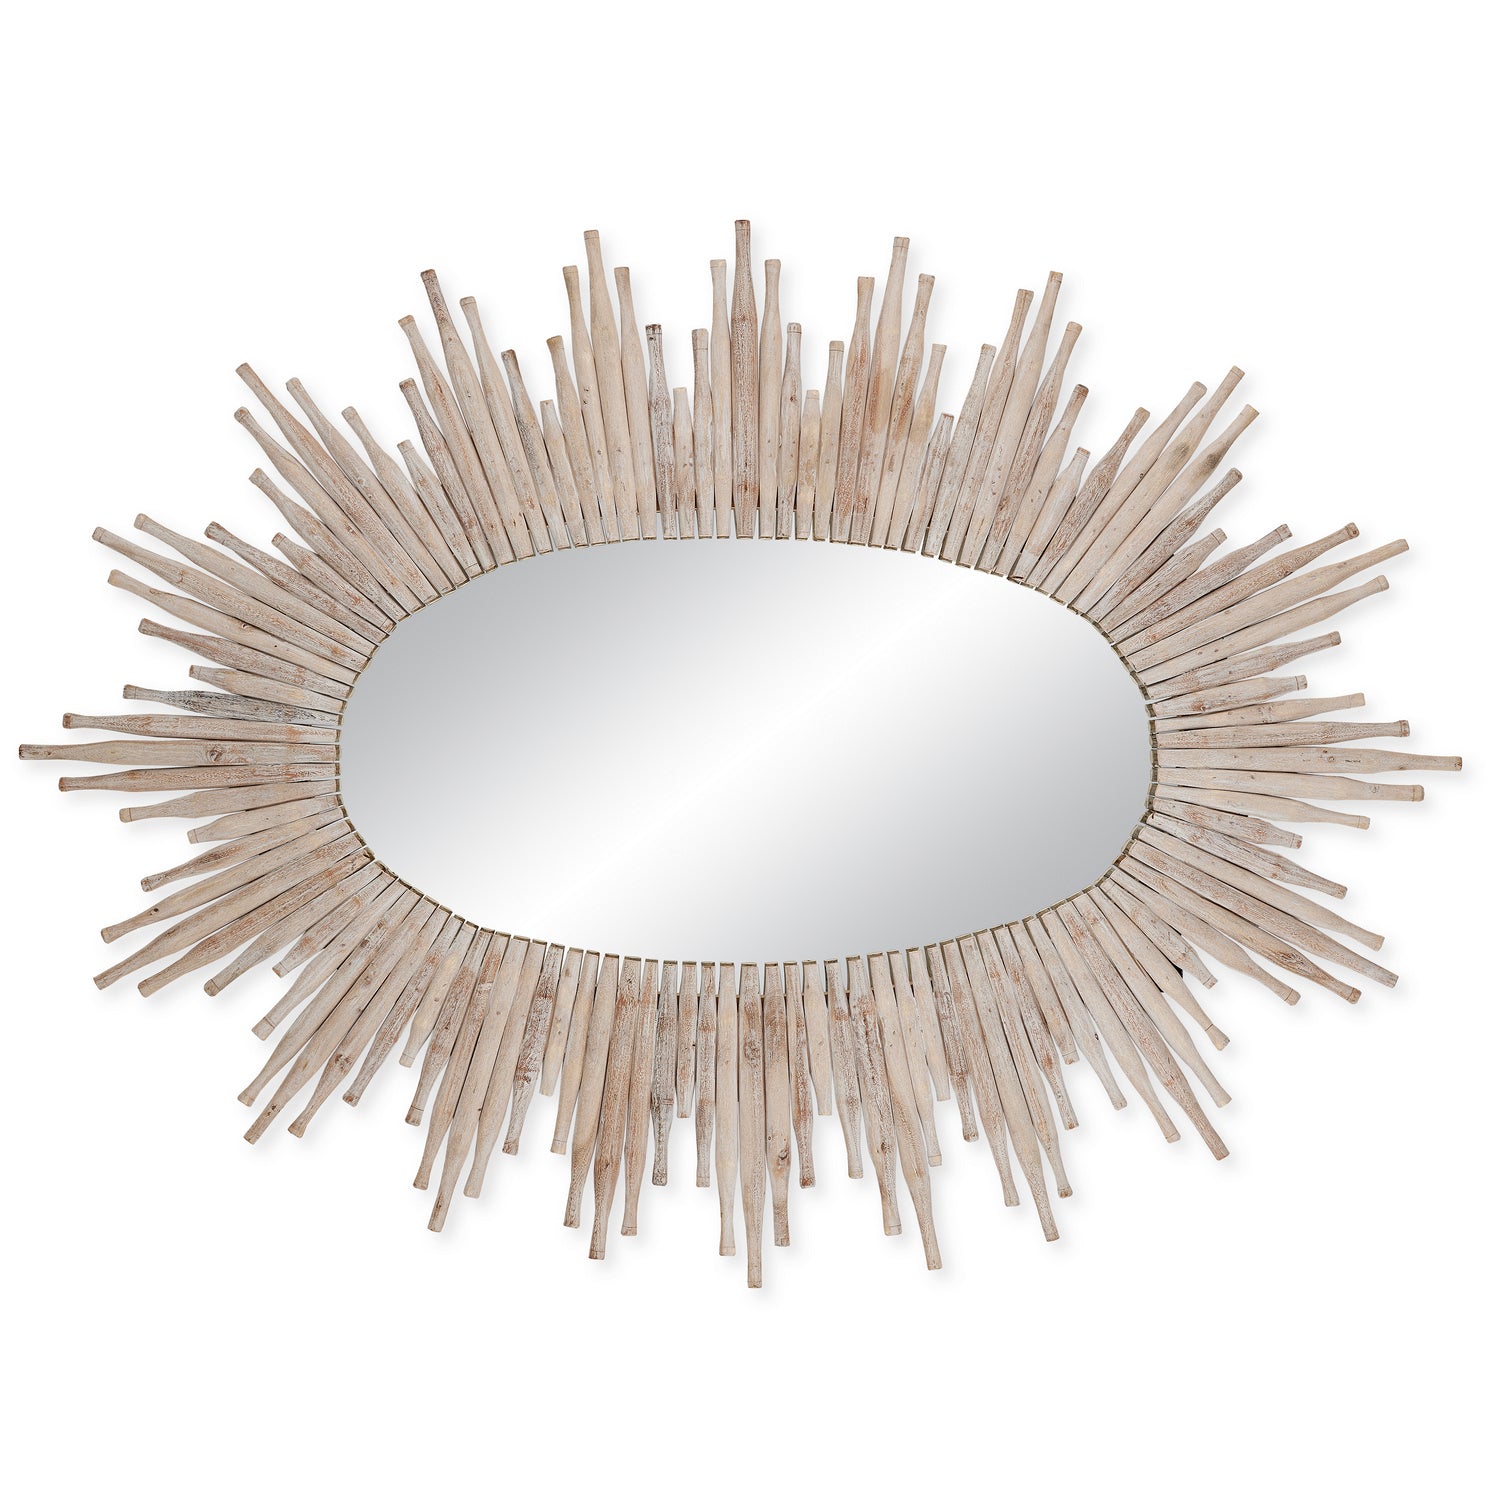 Mirror from the Chadee collection in Whitewash finish